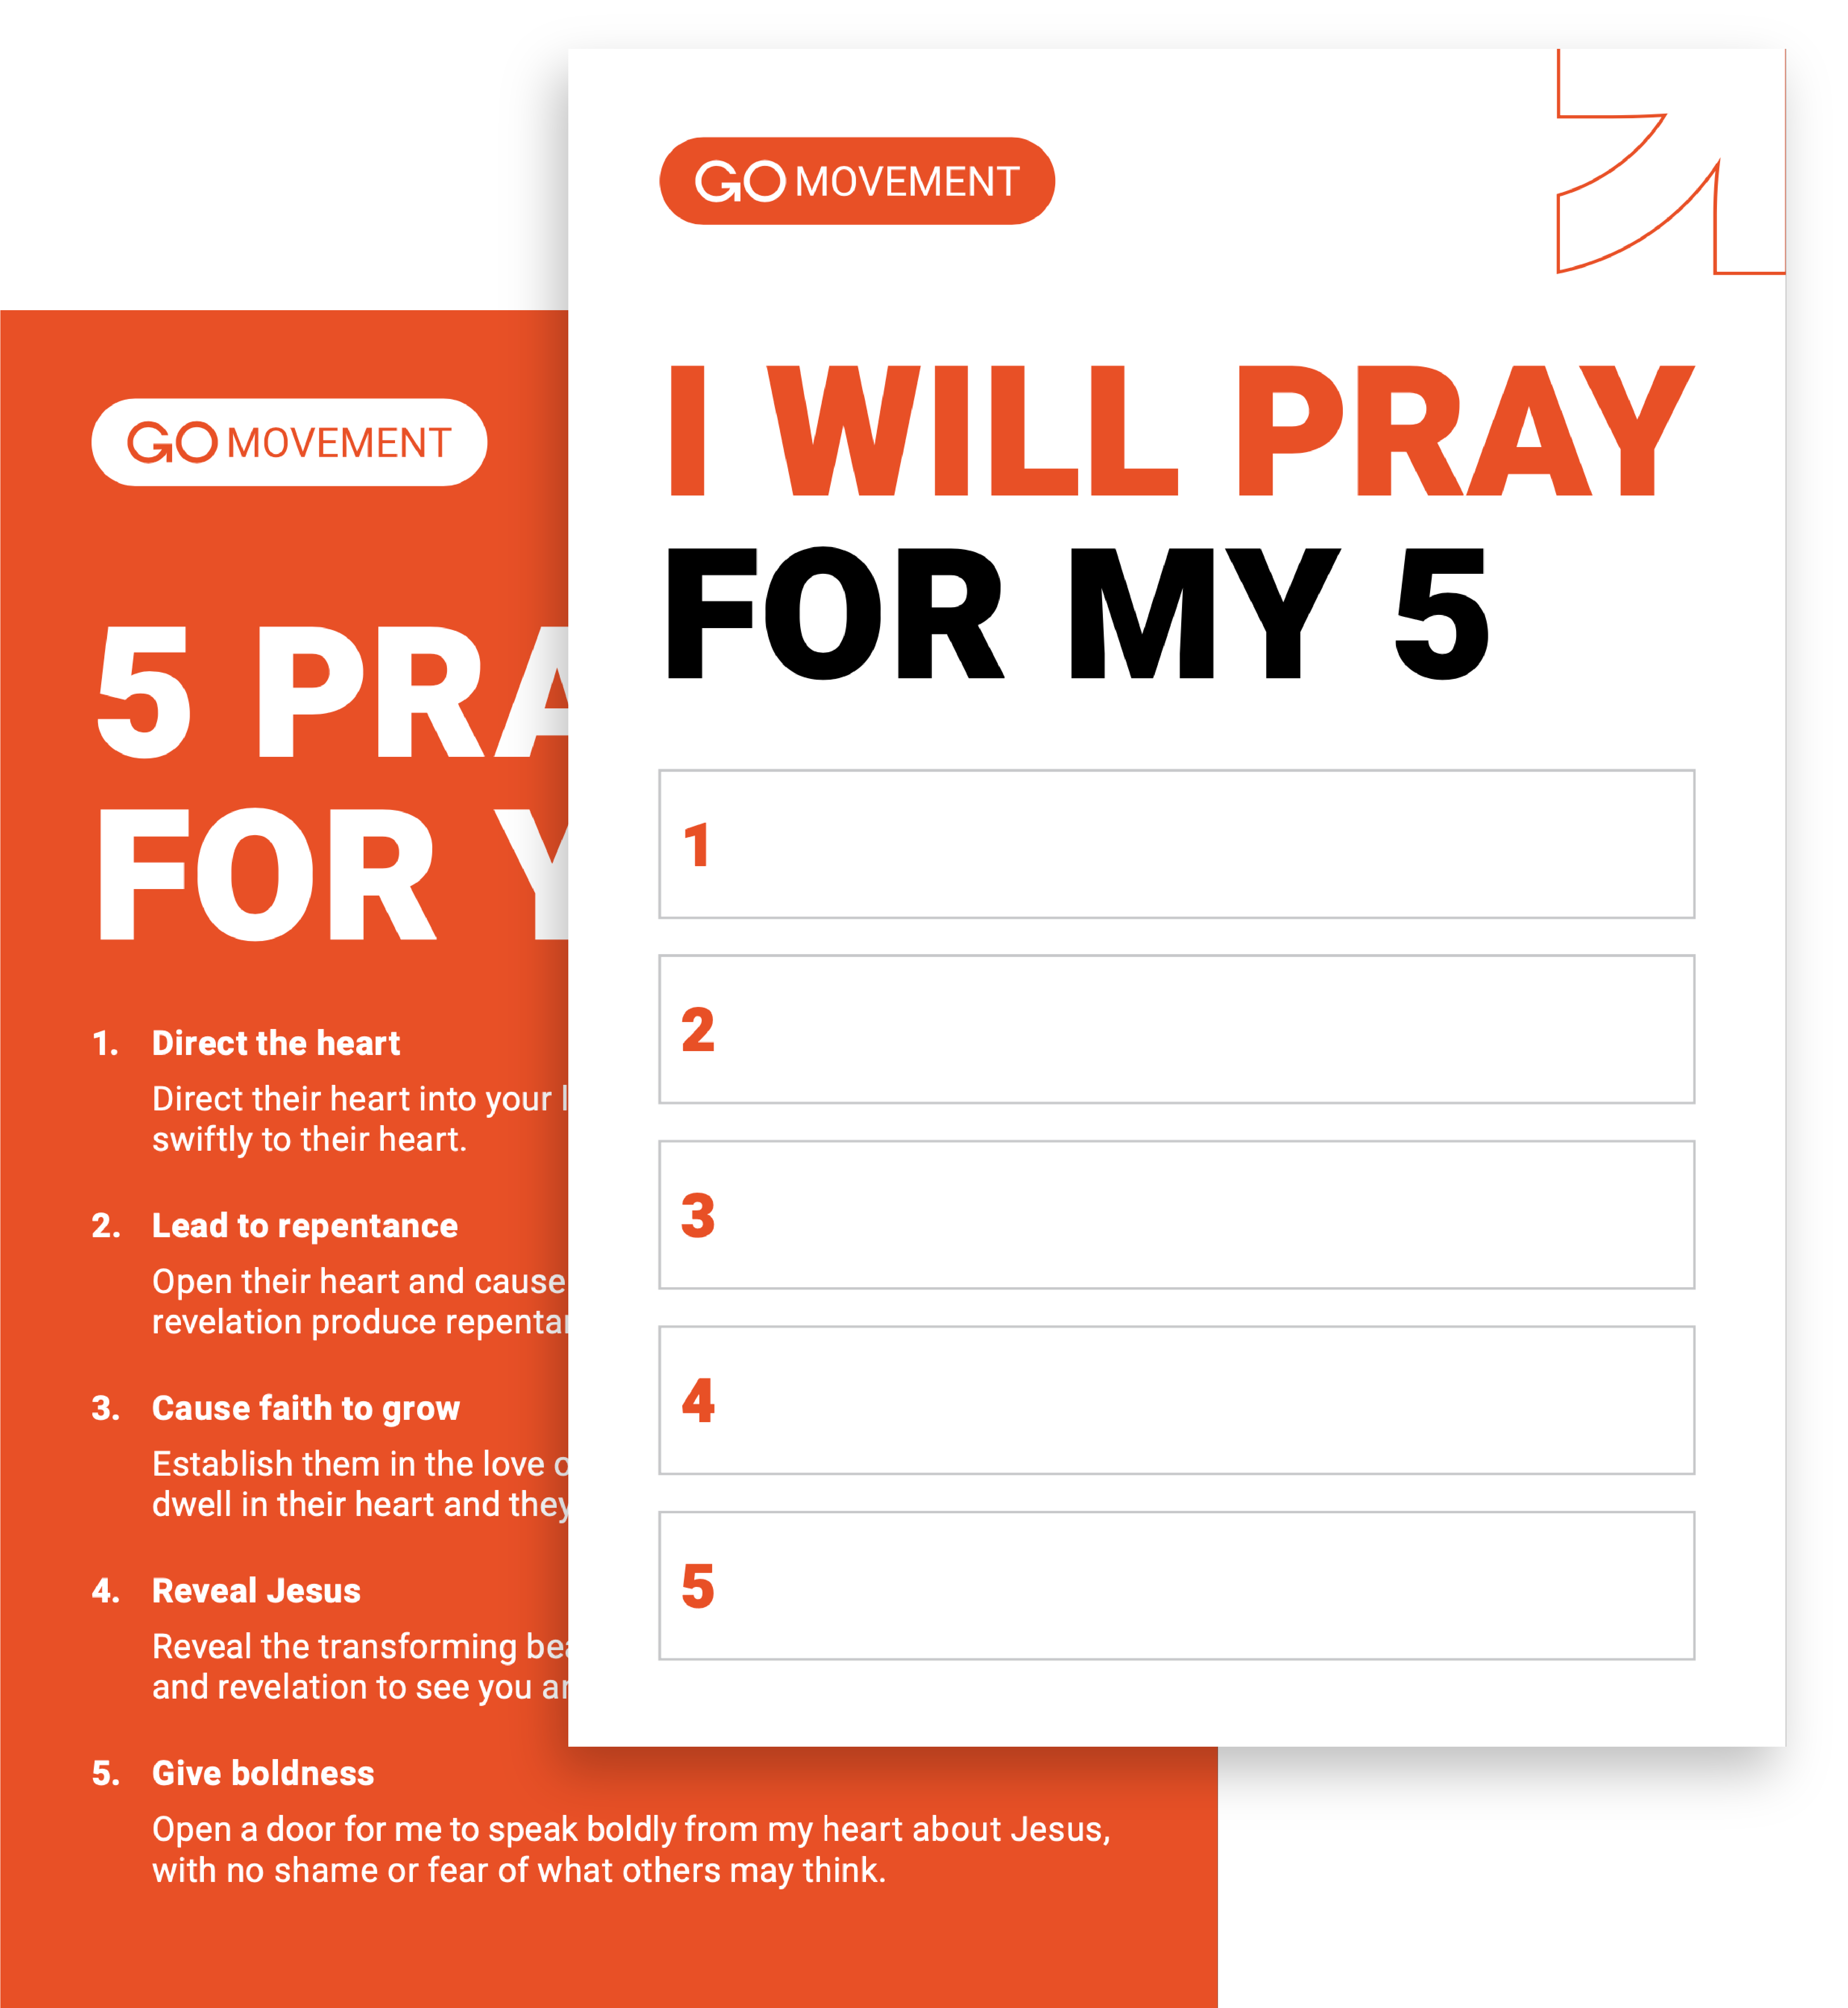 Pray for Five